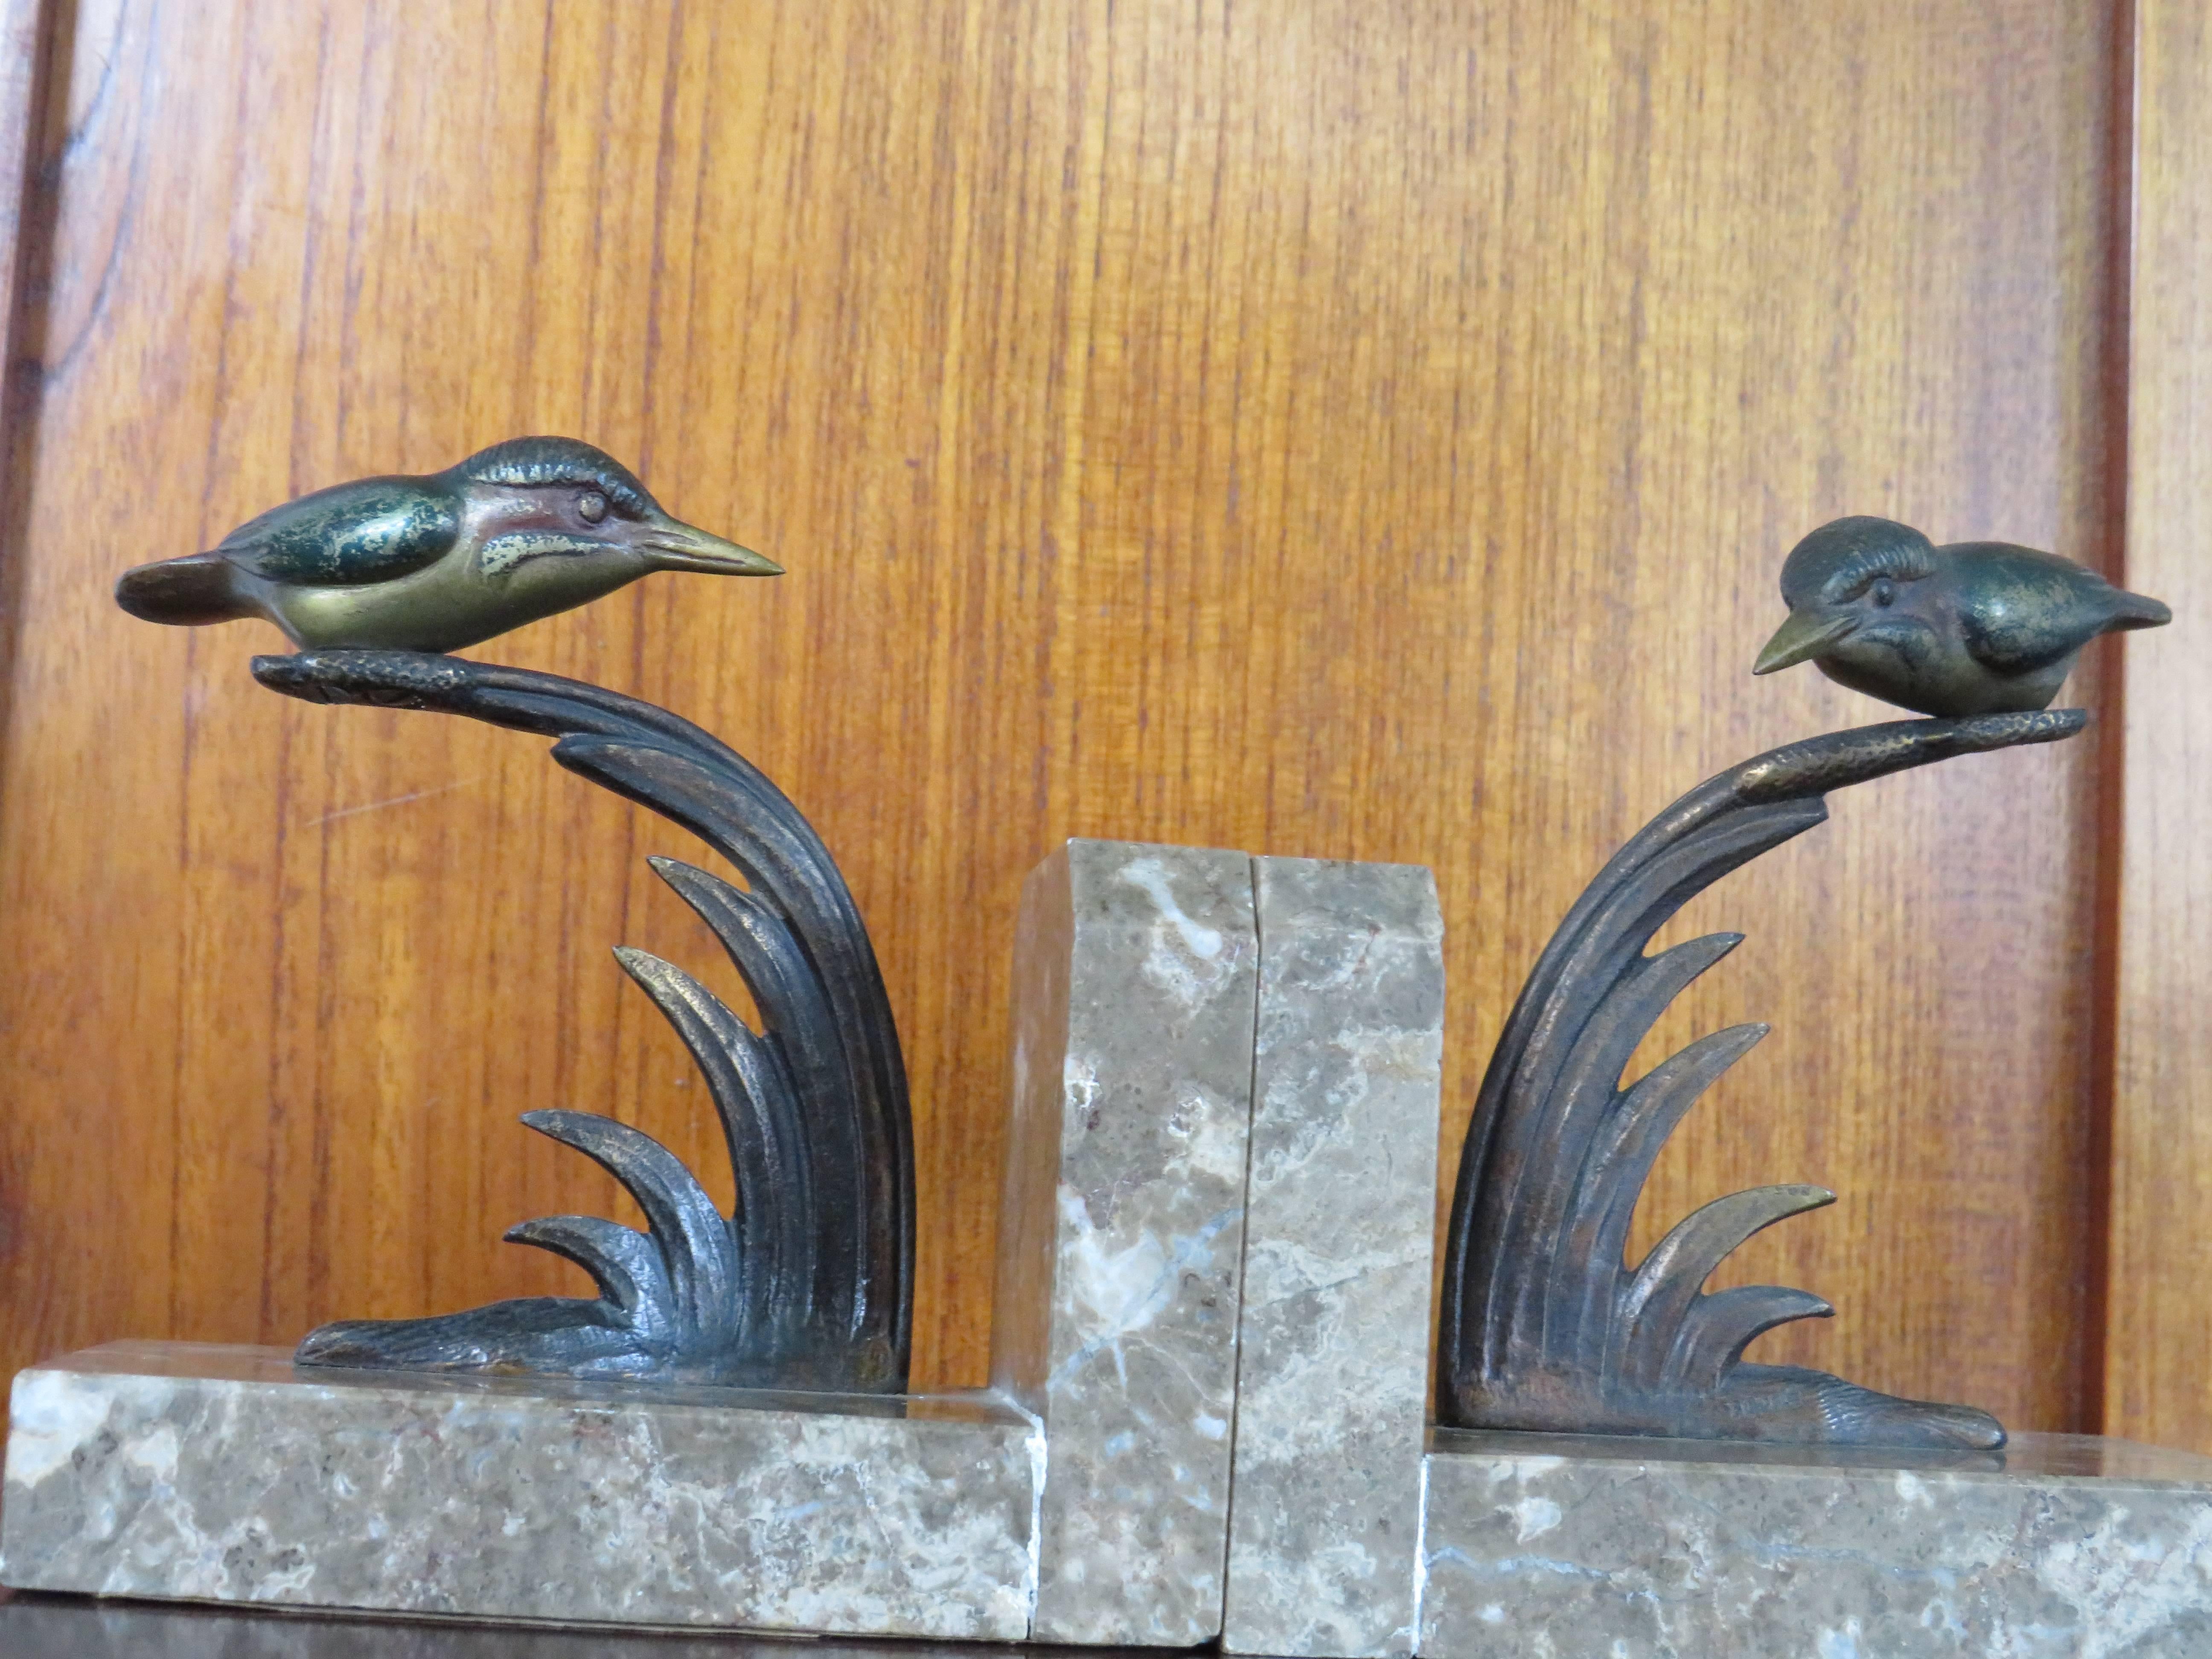 Unique on 1stdibs and possibly worldwide.

This small pair of stylish bookends from circa 1925 is an absolute joy to watch. Both these bookends have the word 'bronze' cast at the bottom of the reeds (see image 3). The kingfisher on the left is